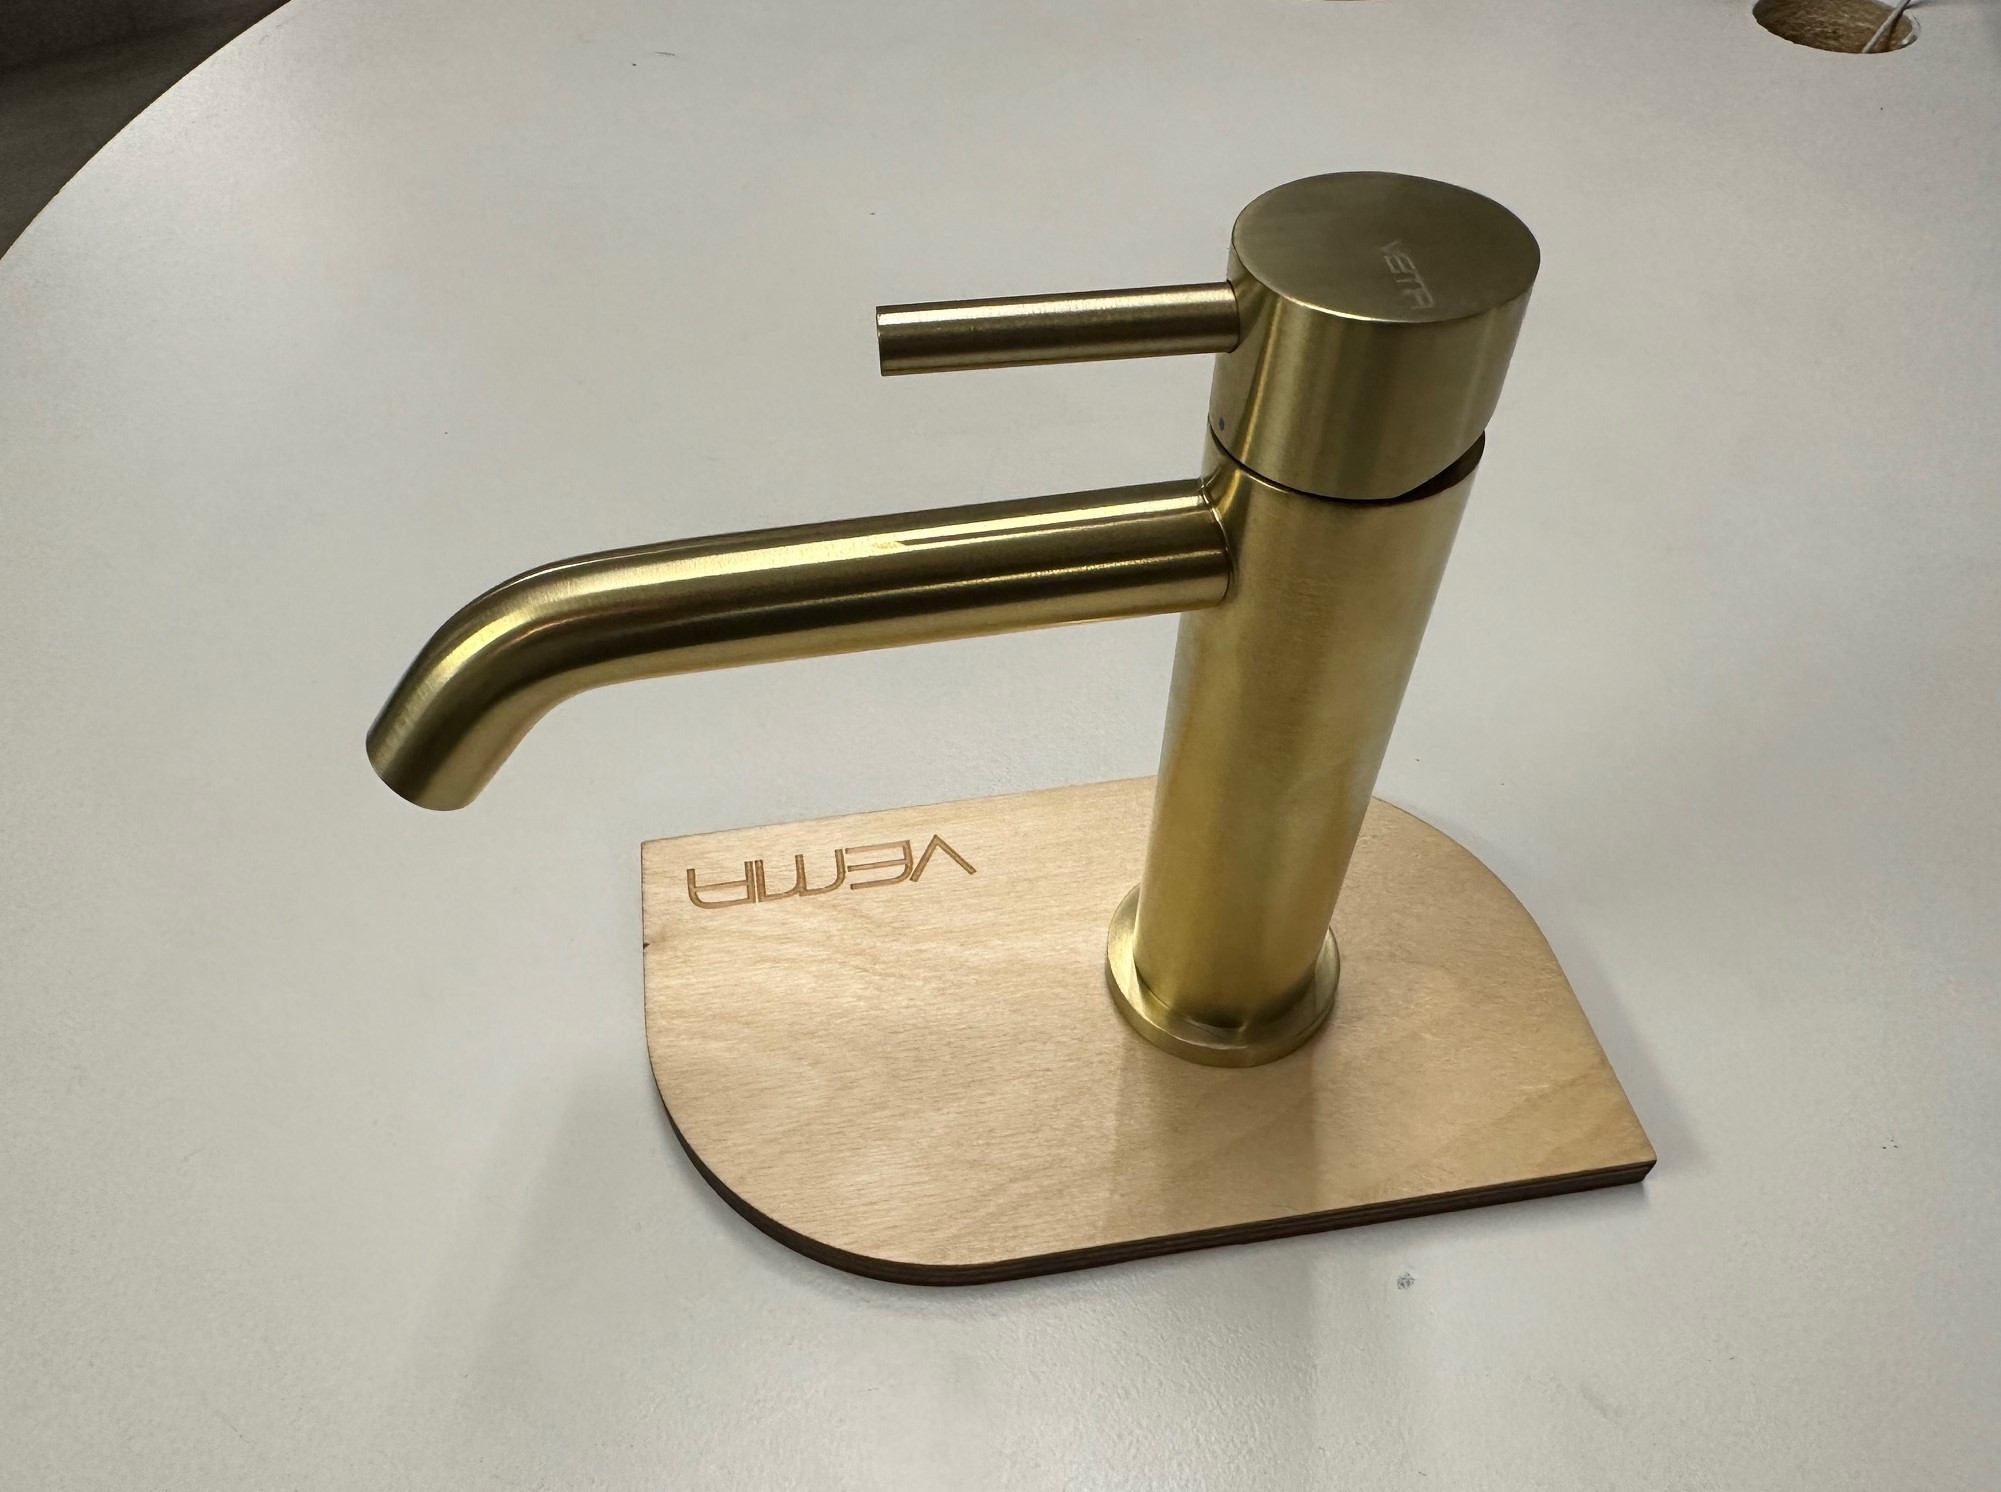 OTAGO series stainless steel faucet in satin gold color by Vema Rubinetterie
